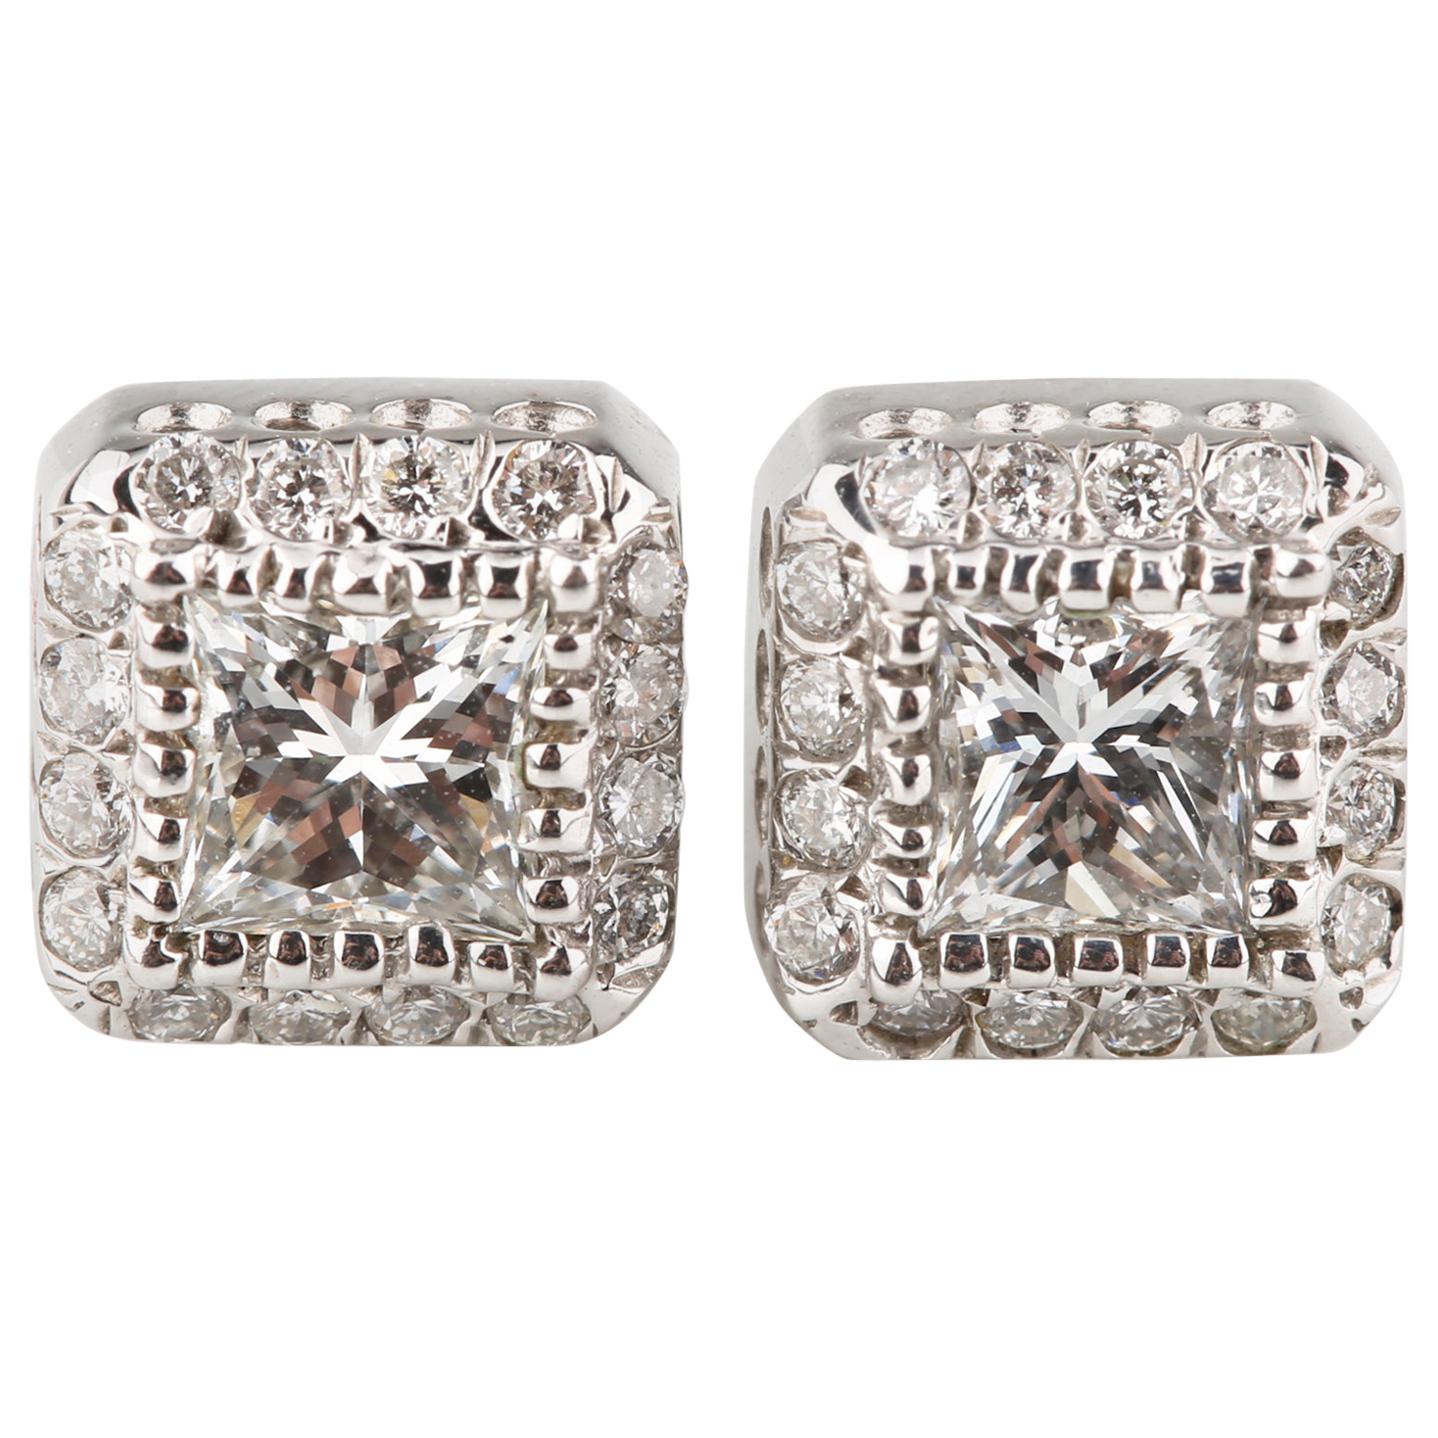 1.20 Carat Diamond Solitaire Stud Earrings with Accent Stones in White Gold